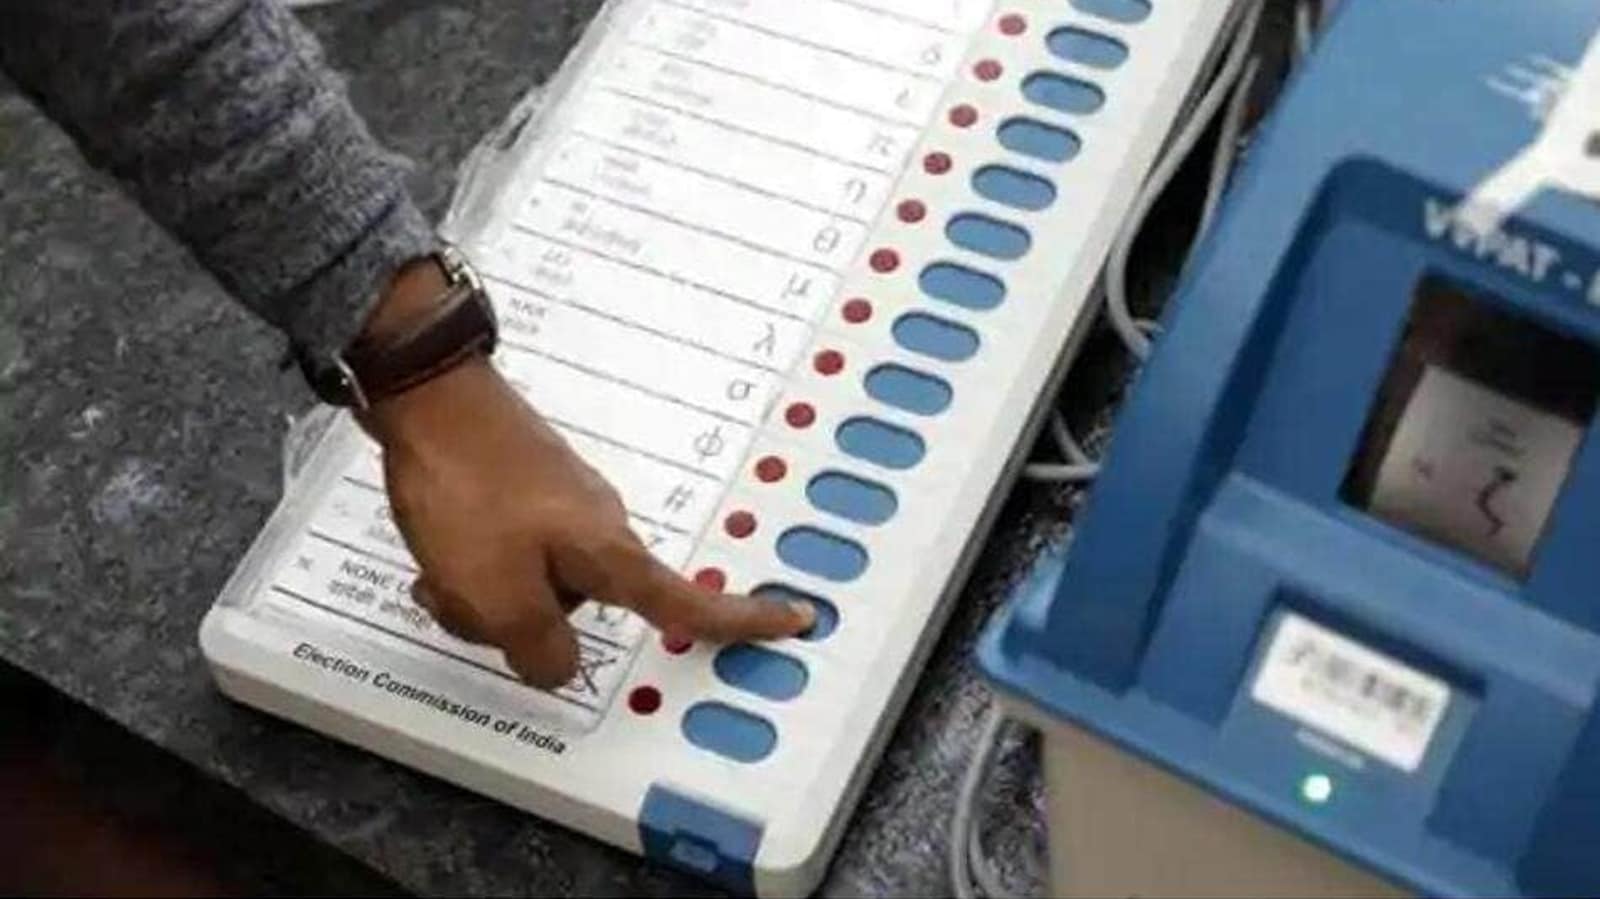 Odisha civic polls amid tight security after delay of over 3 years